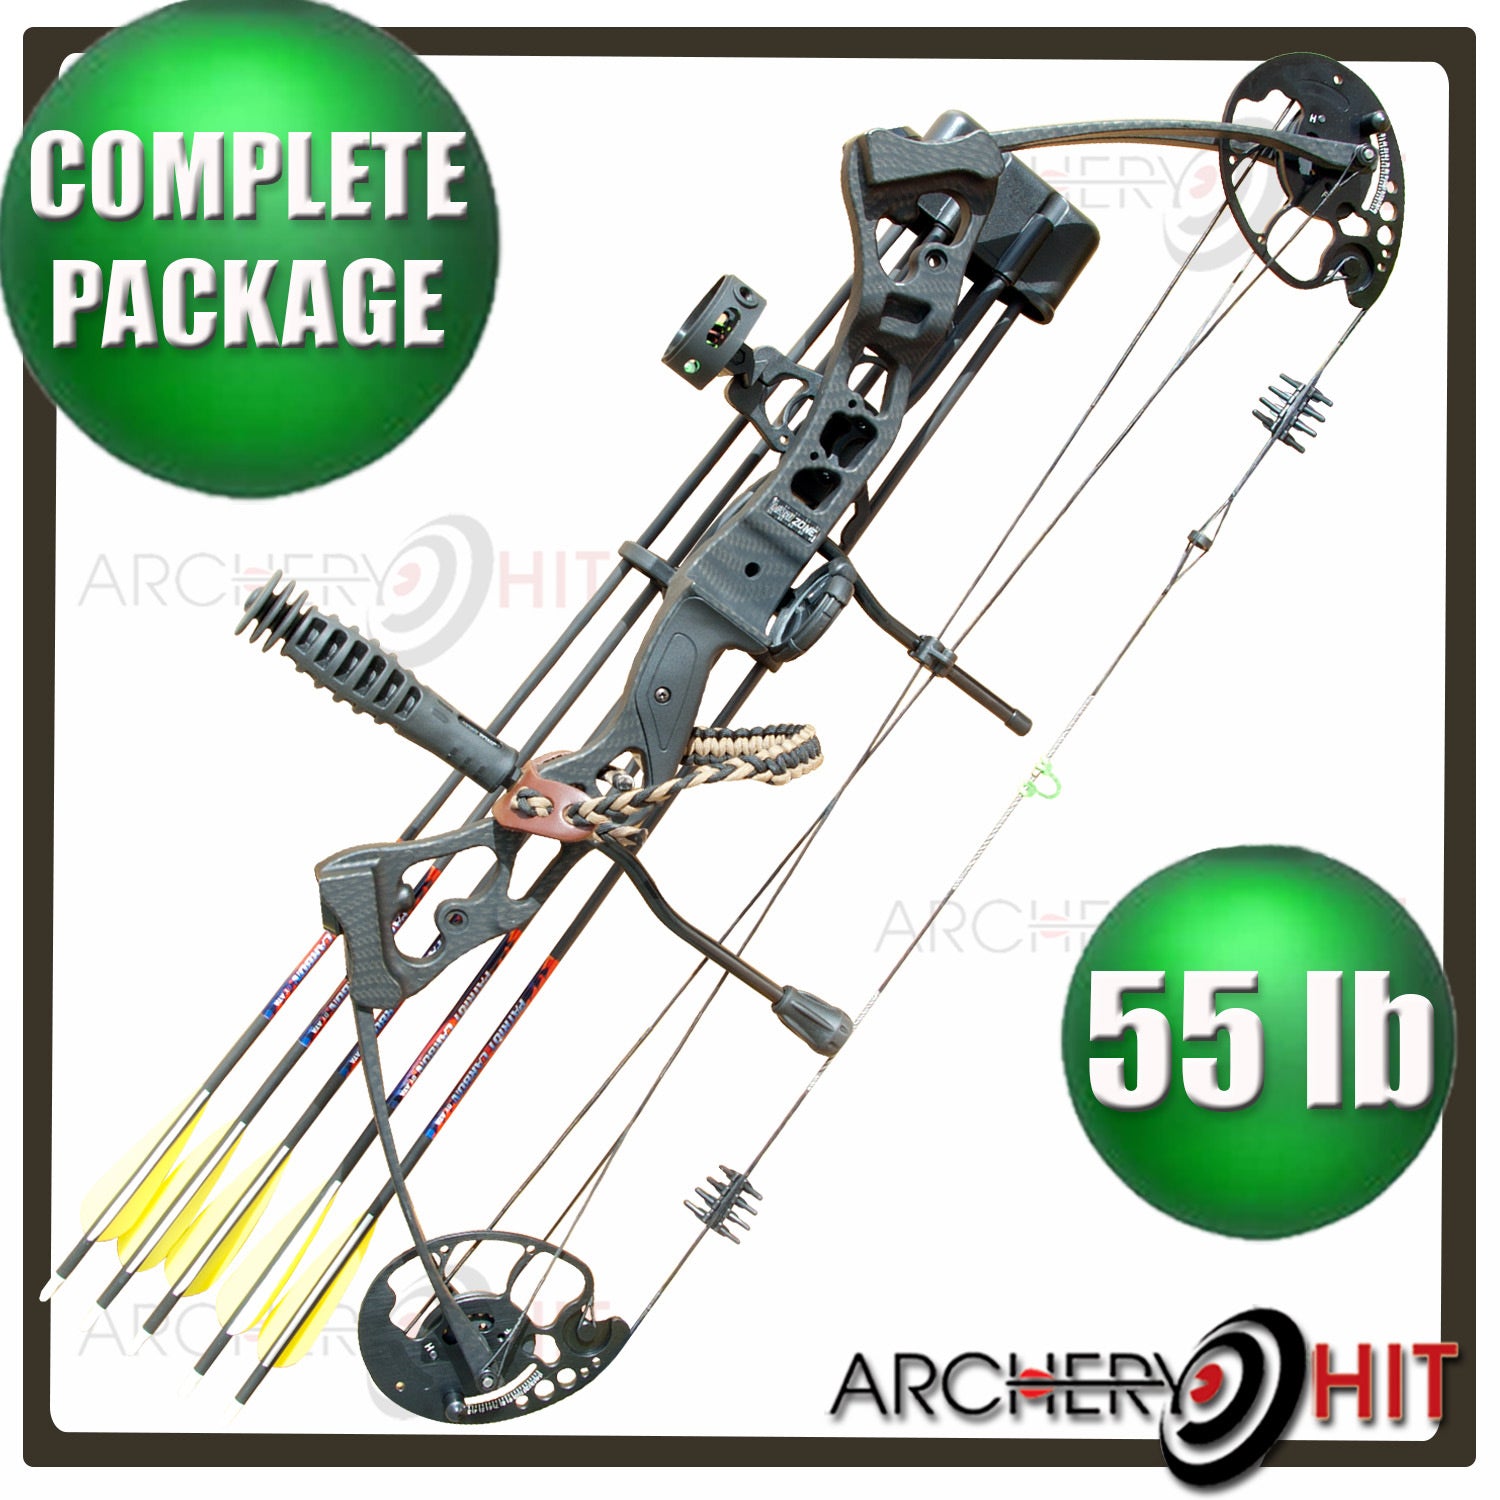 Vulture Compound Bow Black Vulture 35-55lb RTS Package from Archery Hit